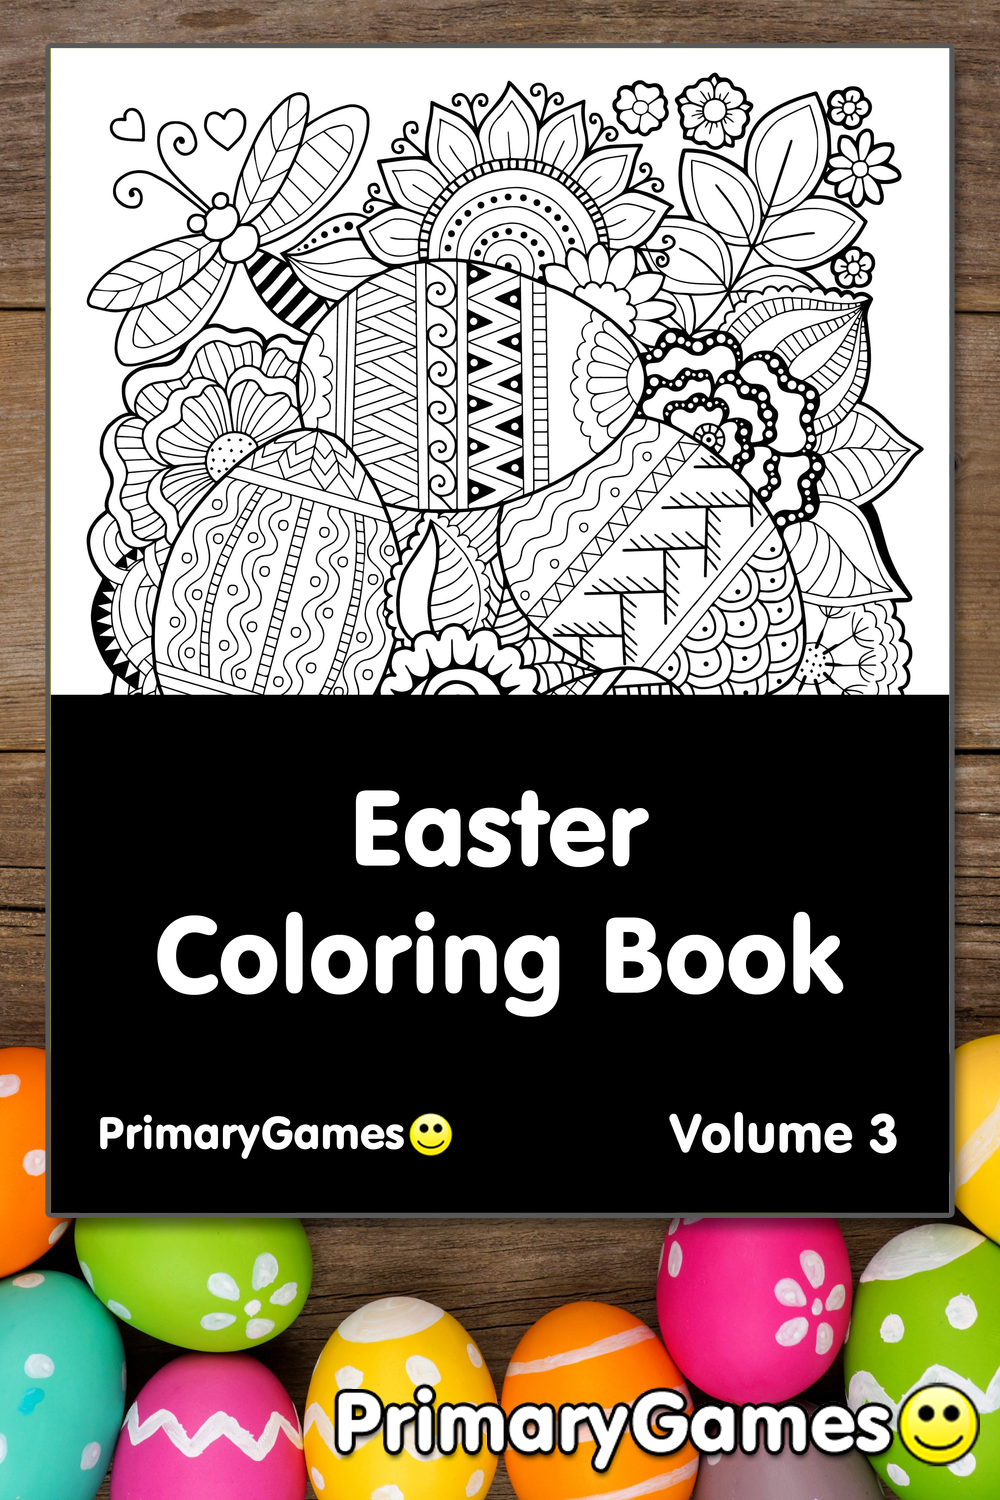 Easter Coloring eBook: Volume 3 • FREE Printable PDF from PrimaryGames